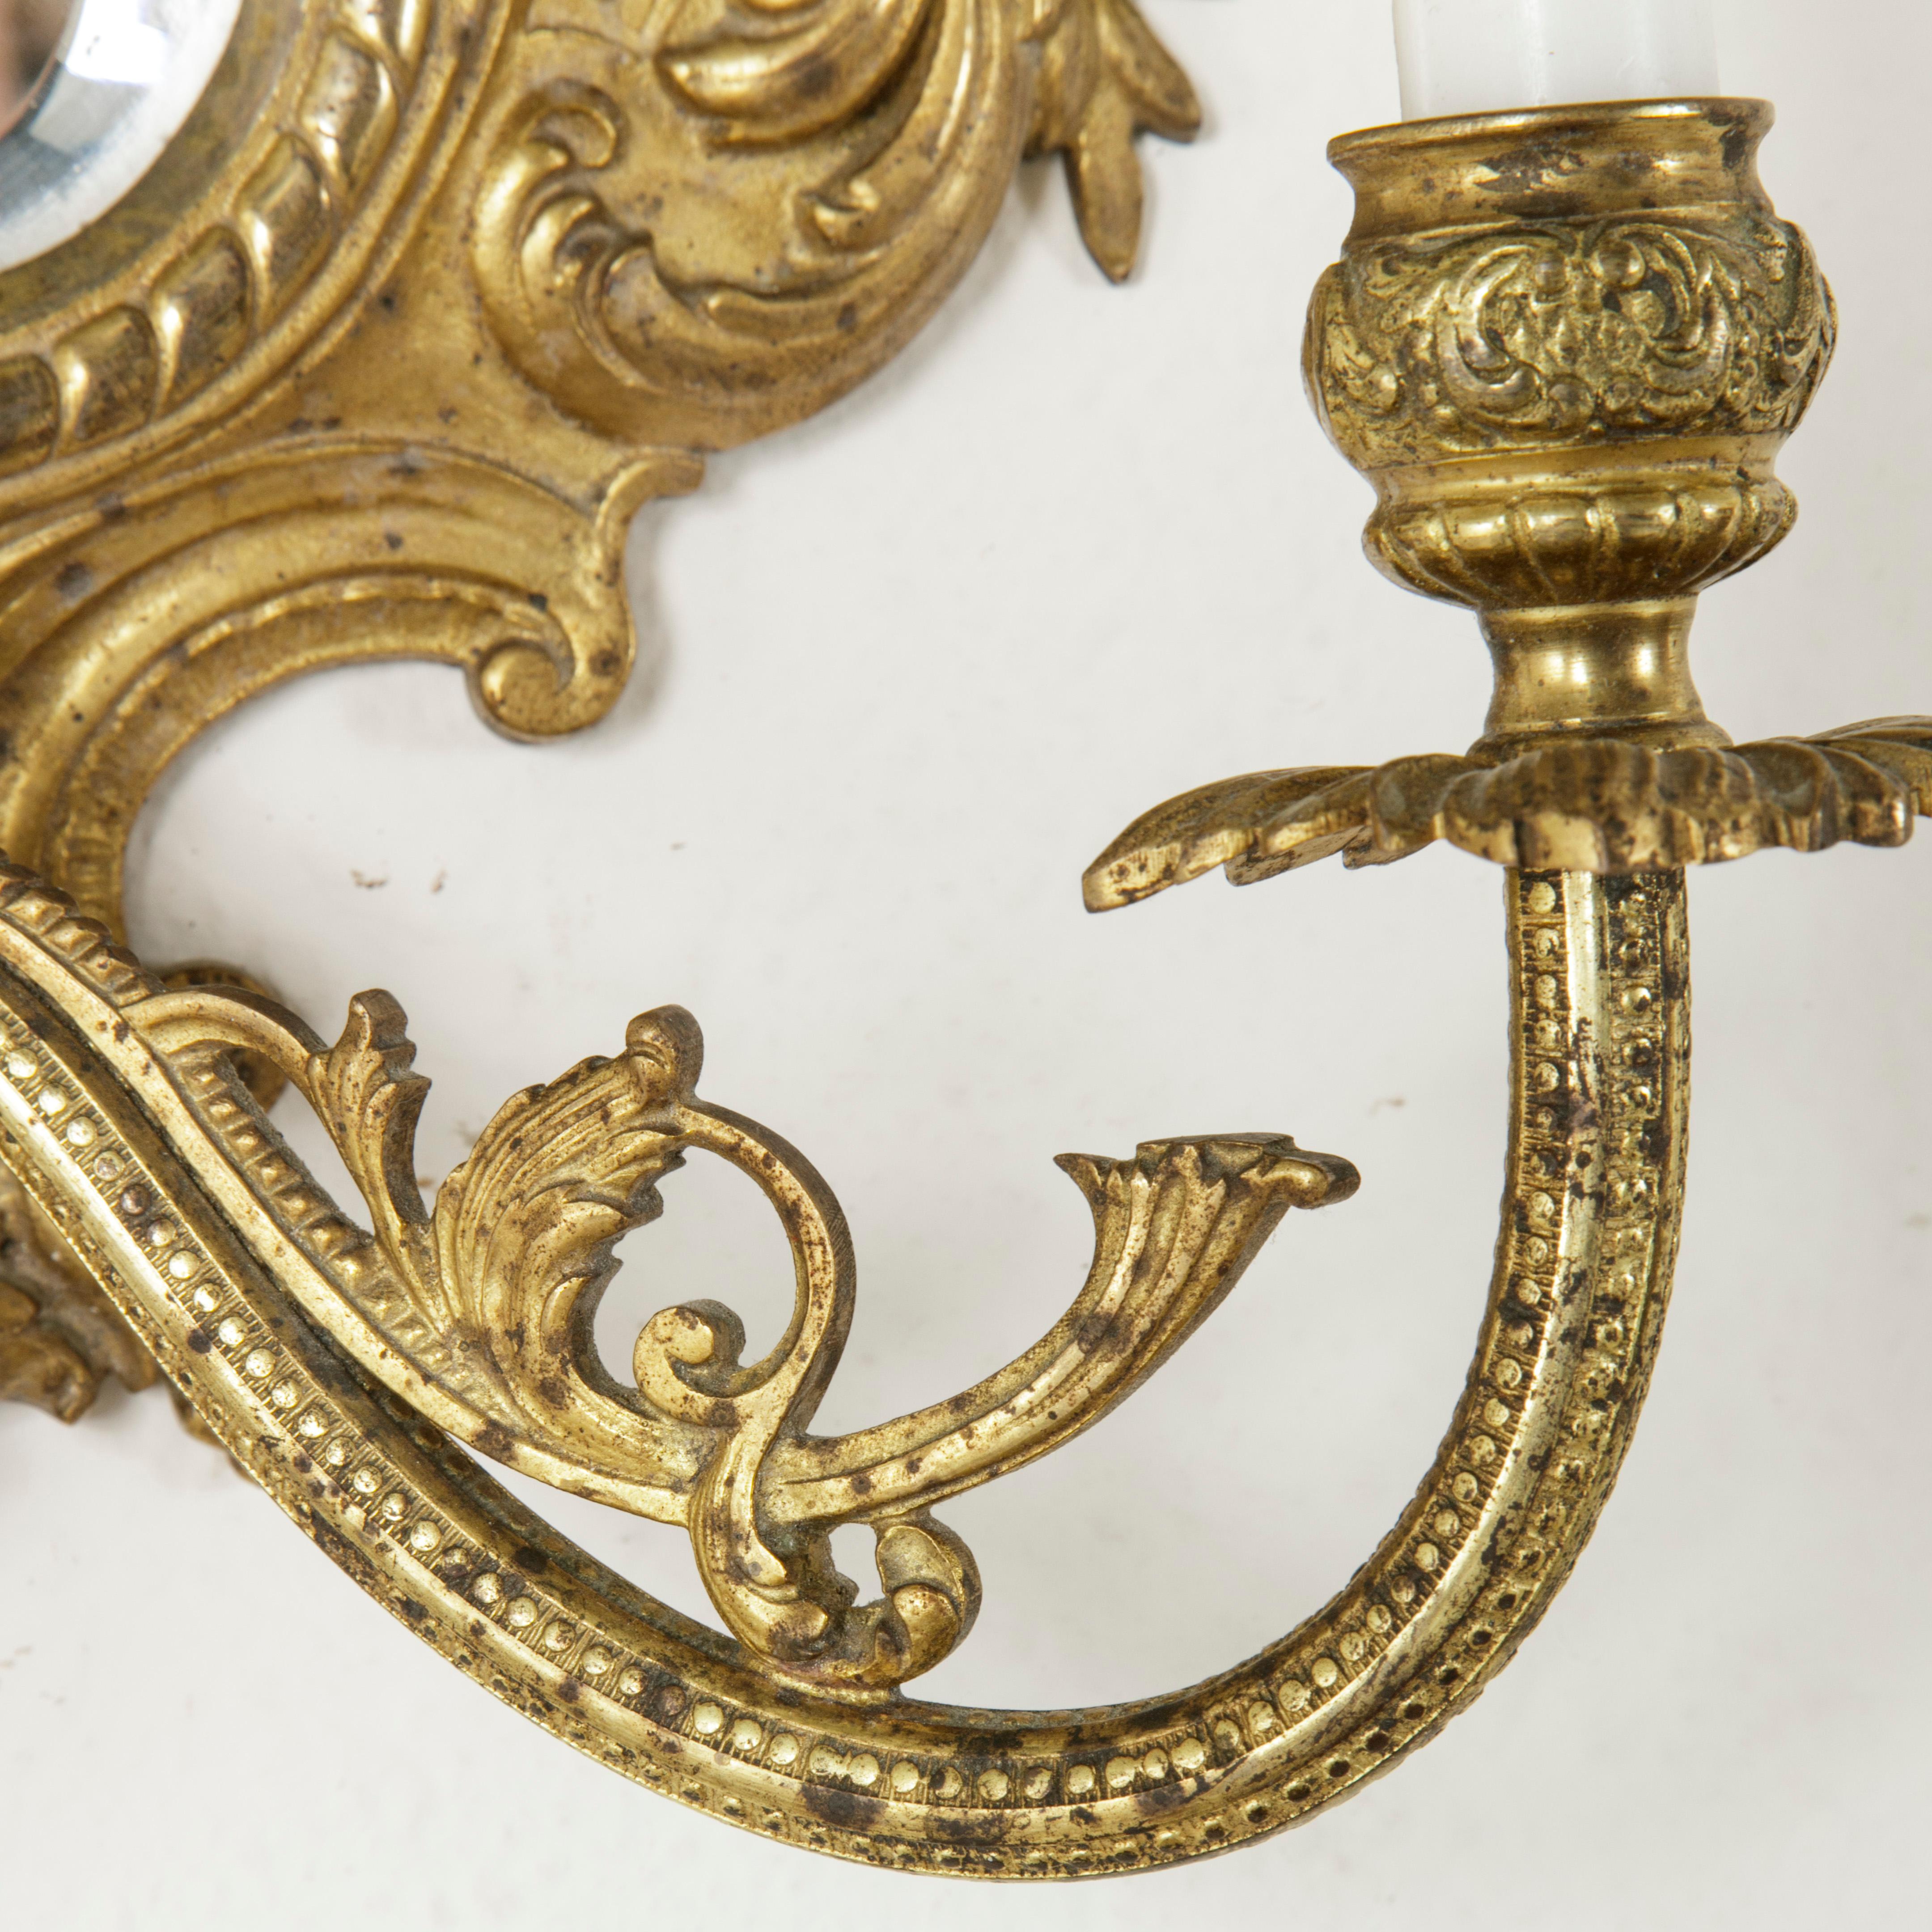 Late 19th Century French Gilt Bronze Girondole Wall Mirror Sconce, Beveled Glass 4